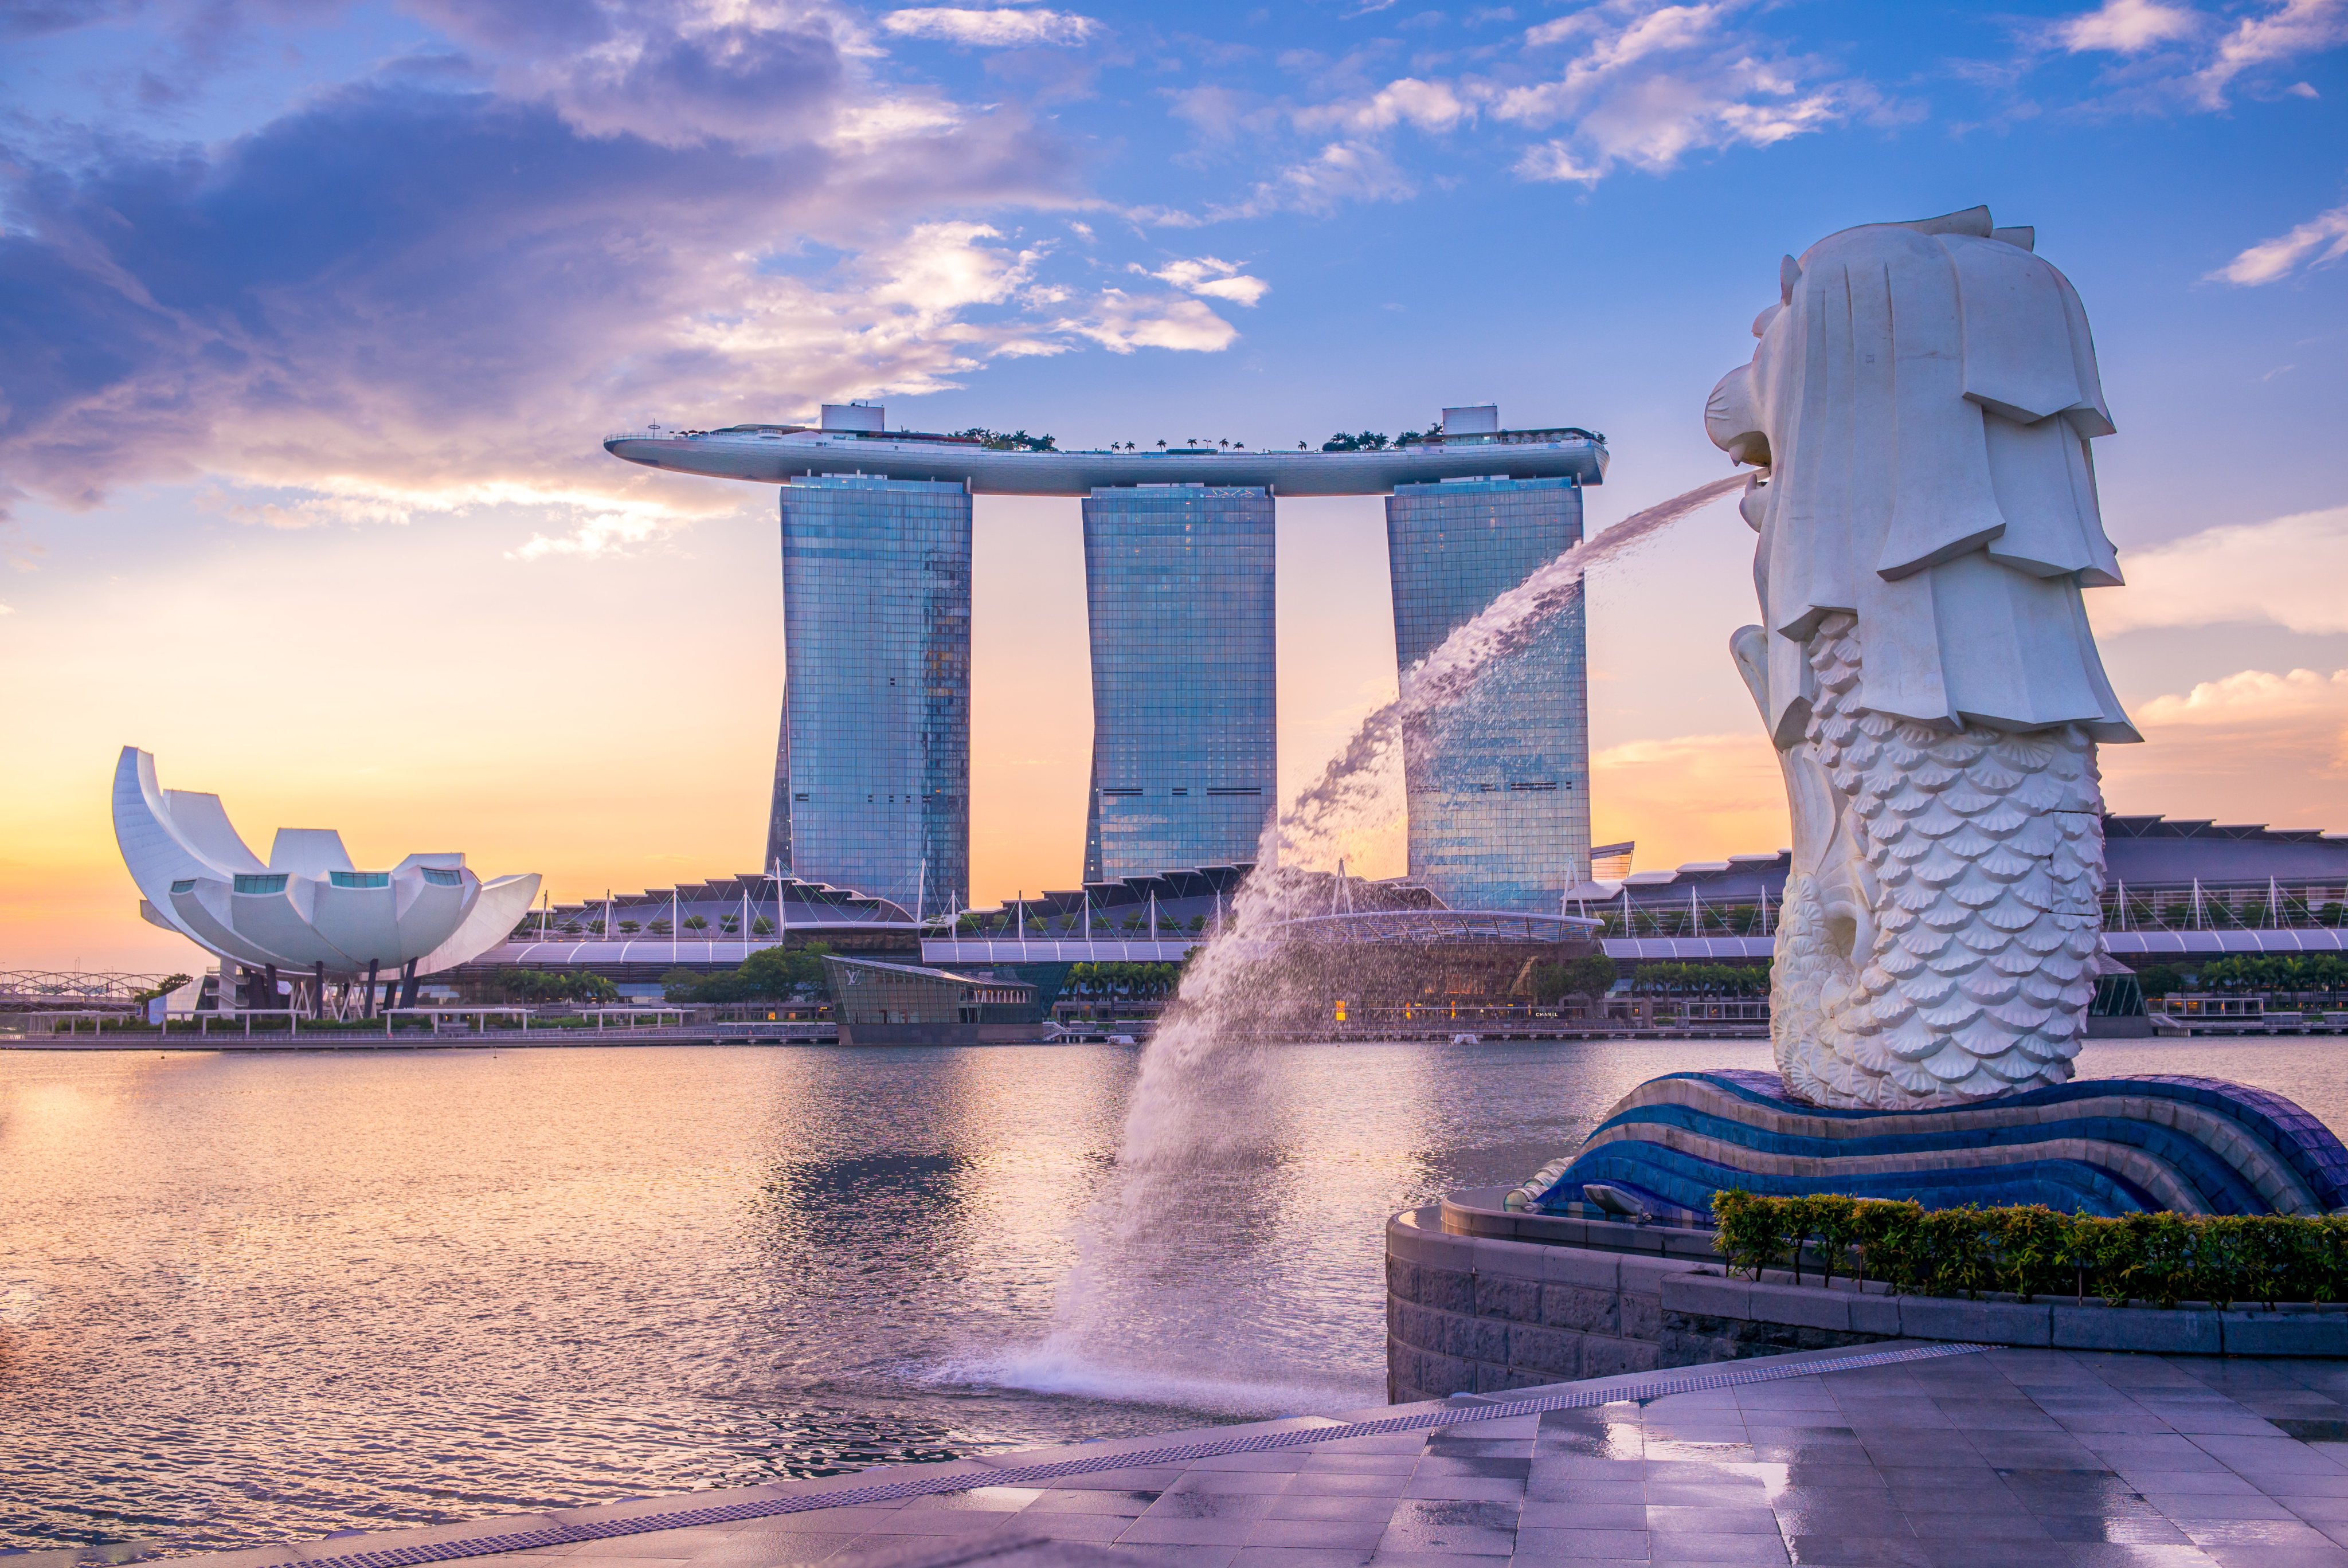 Singapore has emerged as the stand-out star of post-pandemic recovery in Asia. Photo: Shutterstock